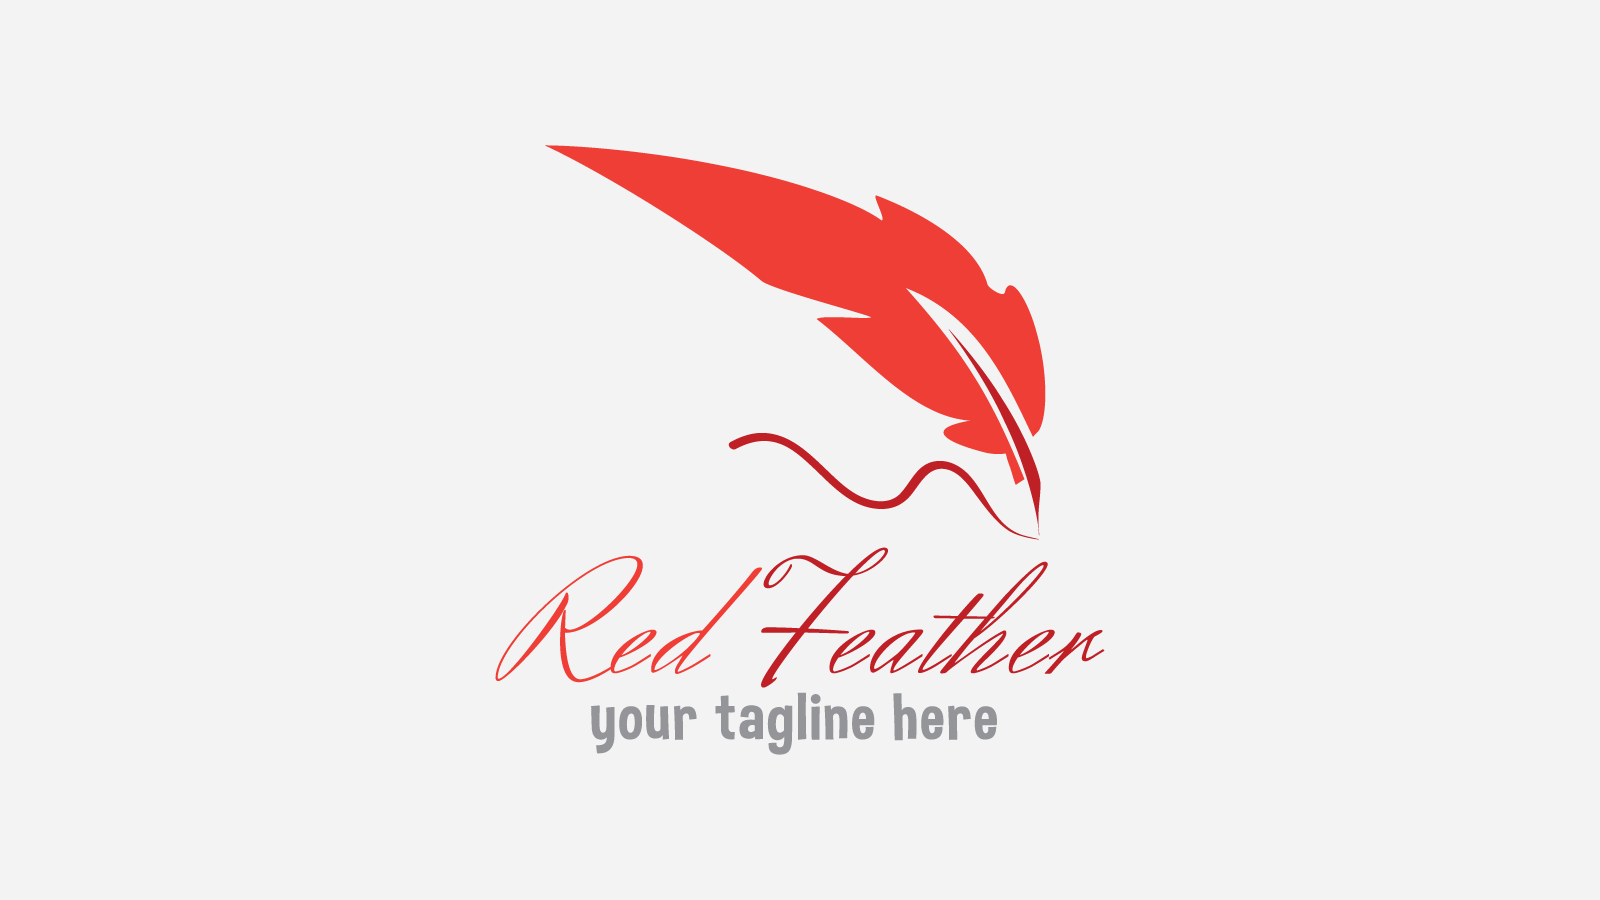 Red Feather Logo - RedFeather free logo design | Zfreegraphic: Free vector logo downloads